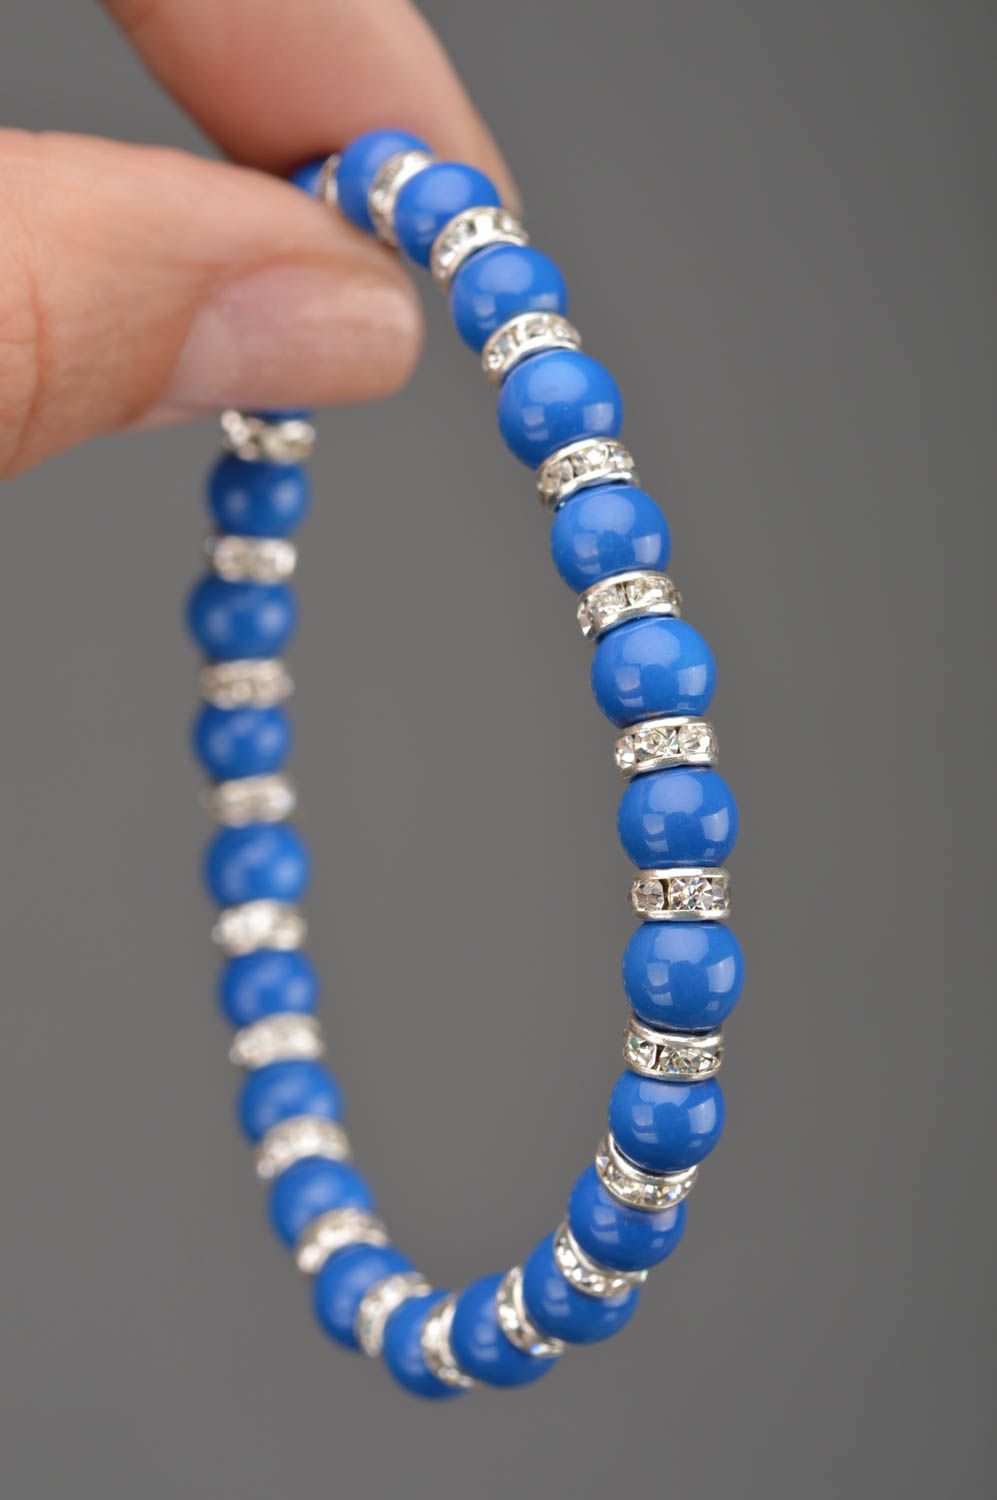 The blue rhinestone bracelet on elastic band with metal charms for teen girls photo 2